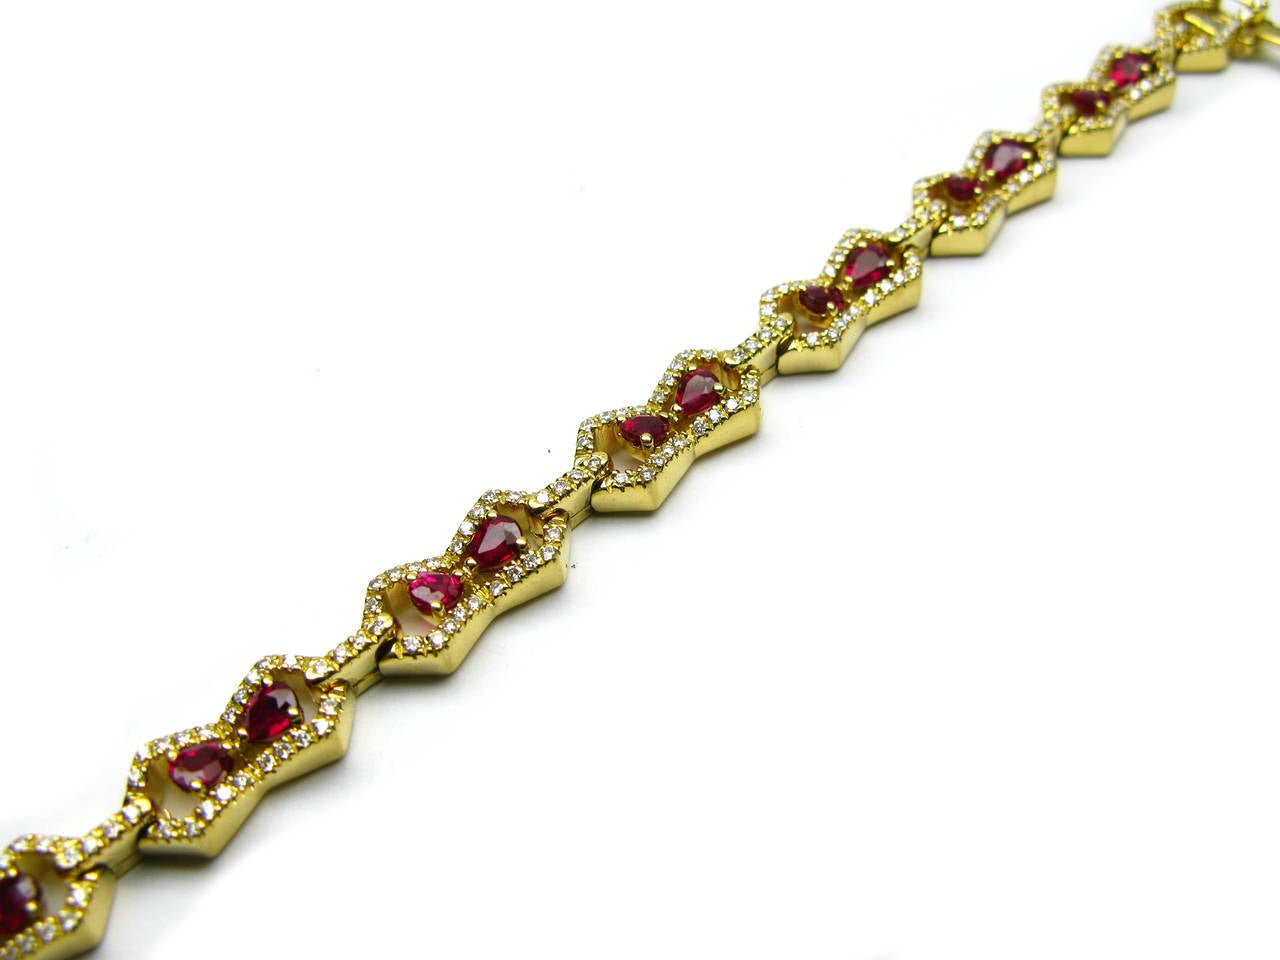 One-of-a-kind 18kt yellow gold bracelet from the Kurt Wayne collection. This beautiful bracelet features 1.32ctw of round brilliant diamonds set in frames around 4.96ctw of pear shape faceted ruby gemstones. This stunner is as unique as the woman